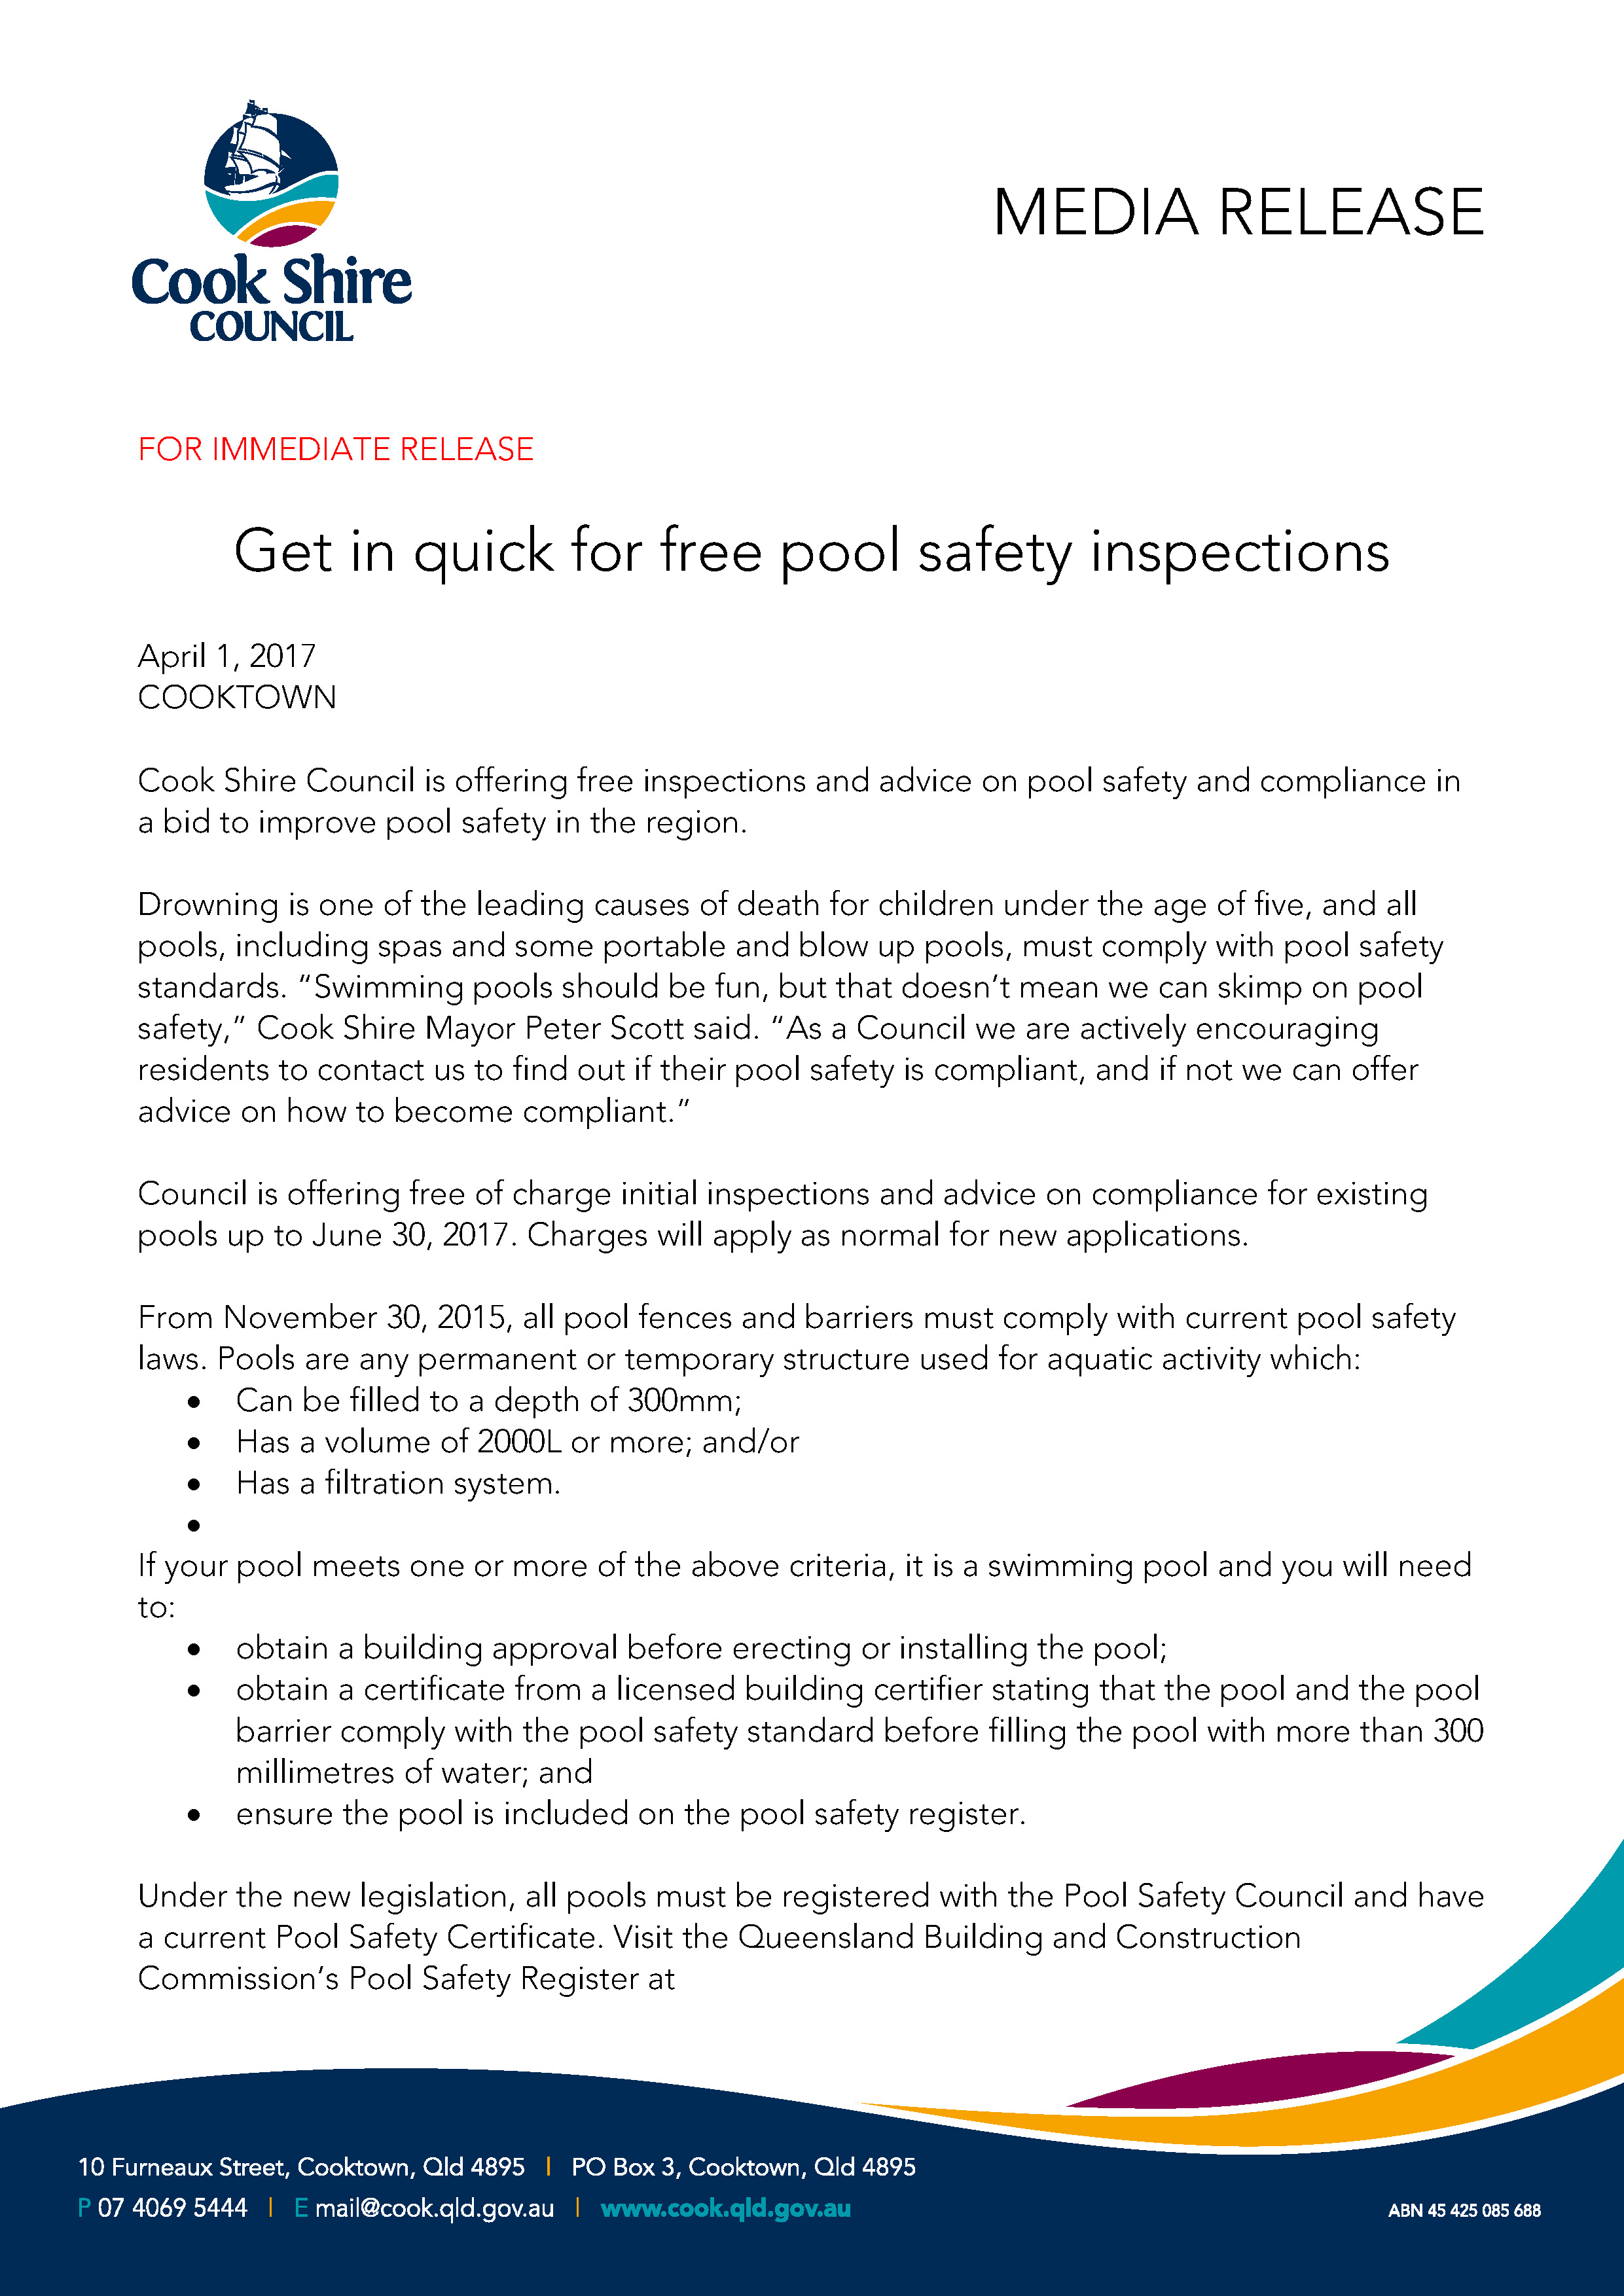 Get in quick for free pool safety inspections